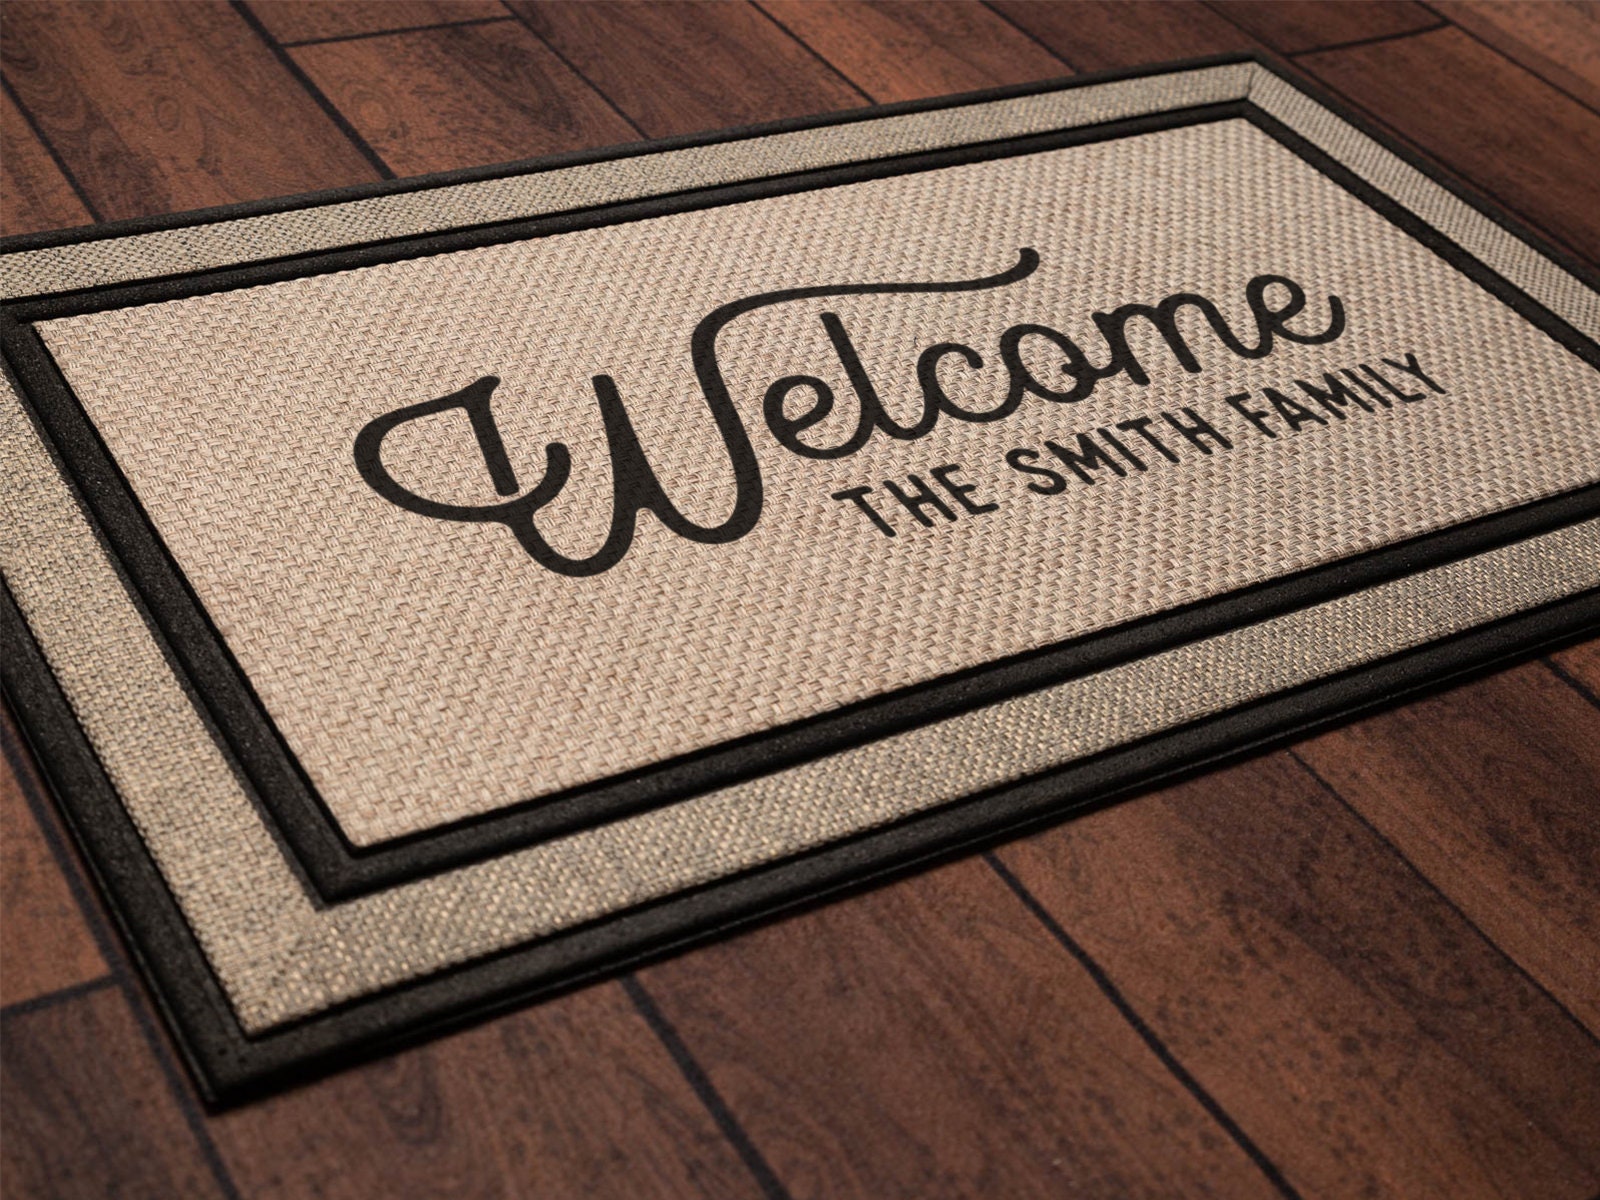 Personalized Doormat Customized Doormat Custom Family Name Personalized Gifts Housewarming gift Gift for new home New Home Decoration